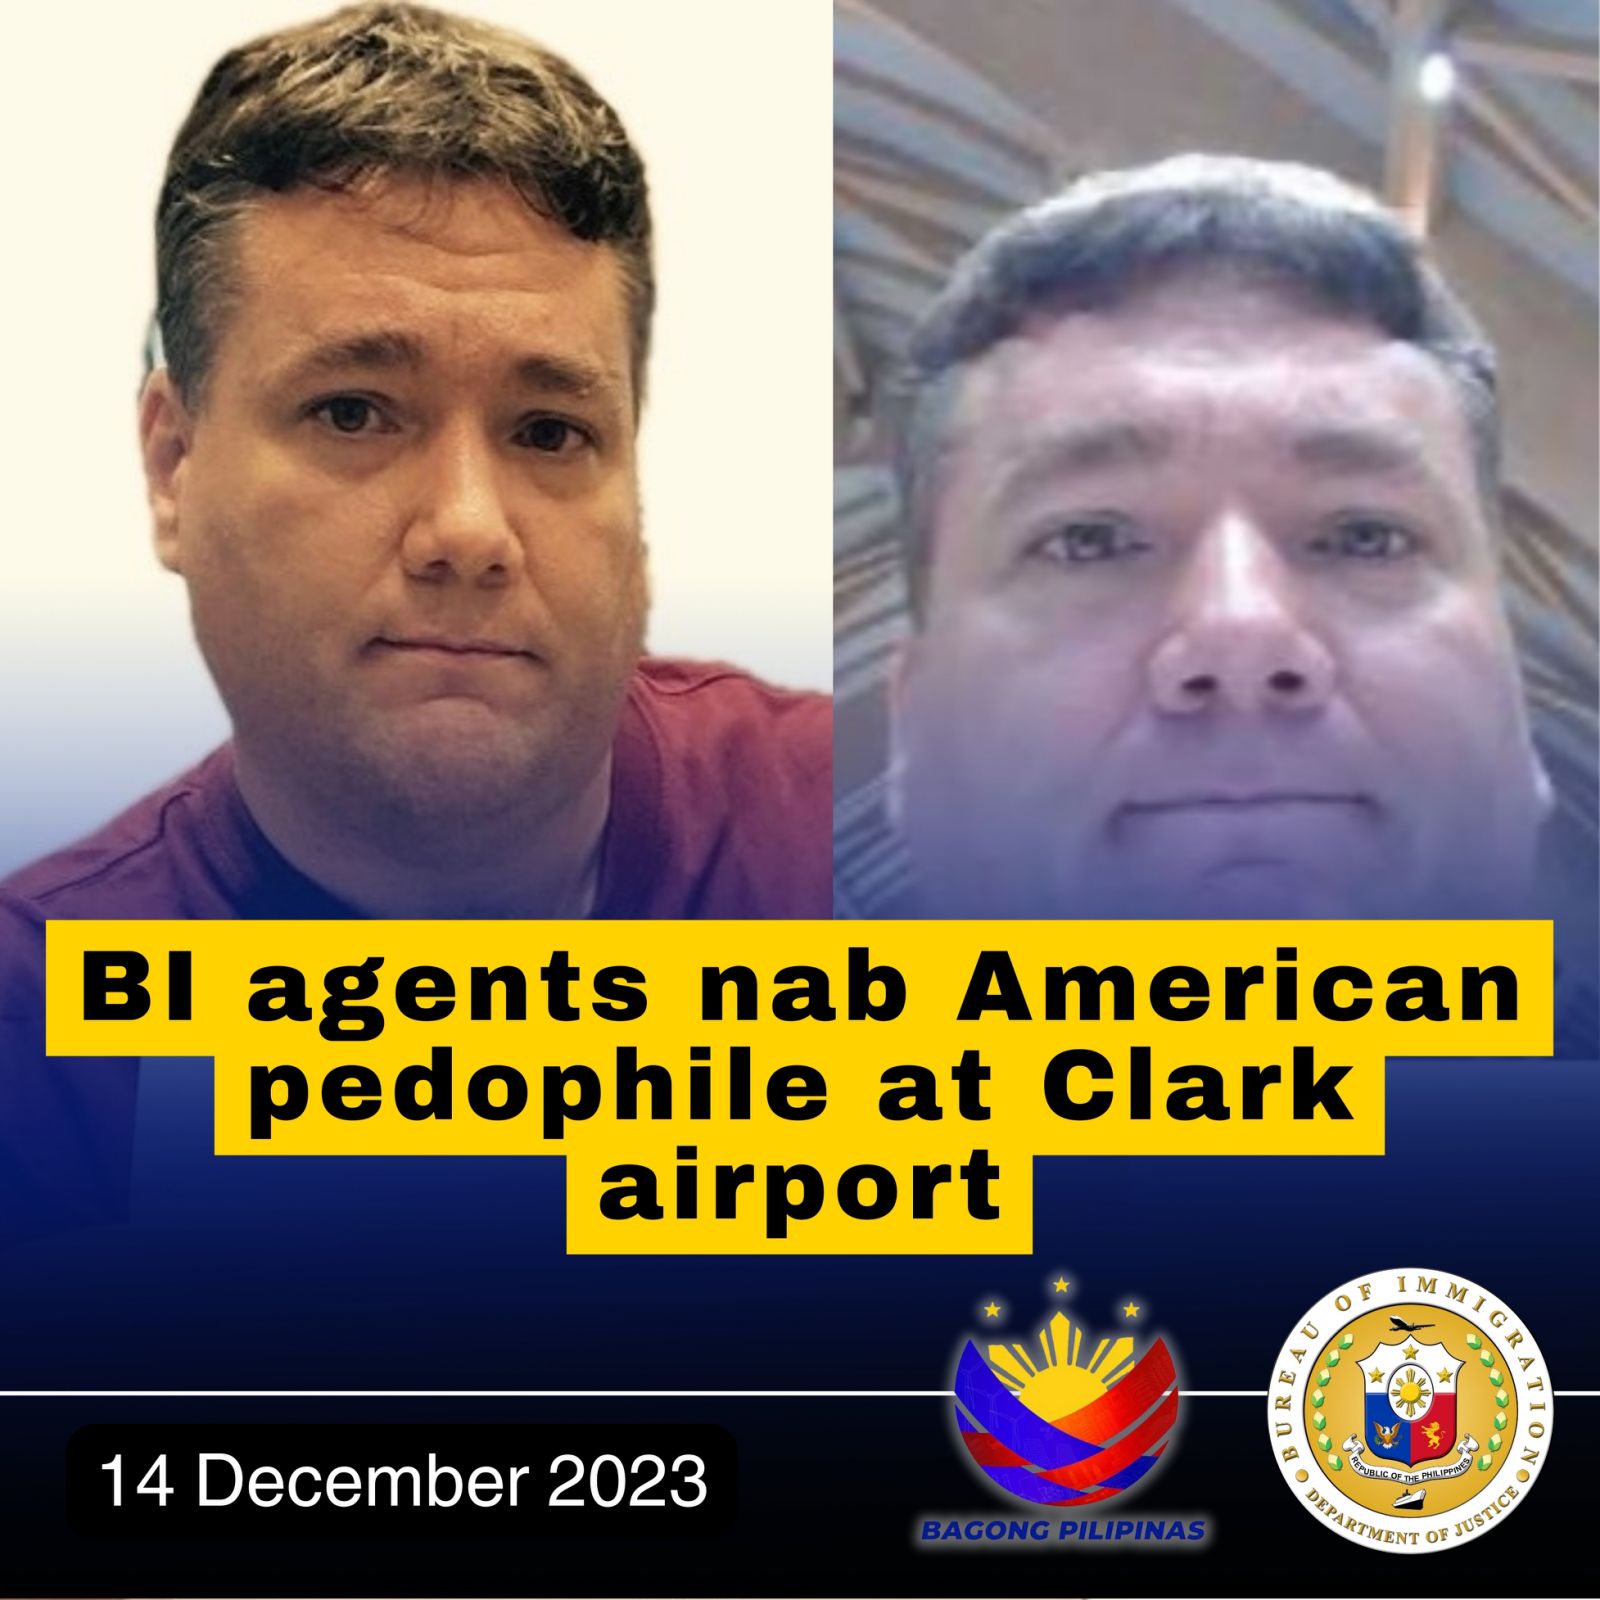 American pedophile arrested at Clark airport. [Steven Daniel Griswold, an alien on the Bureau of Immigration’s watchlist for being wanted by the US federal authorities. Photo from the BI.]